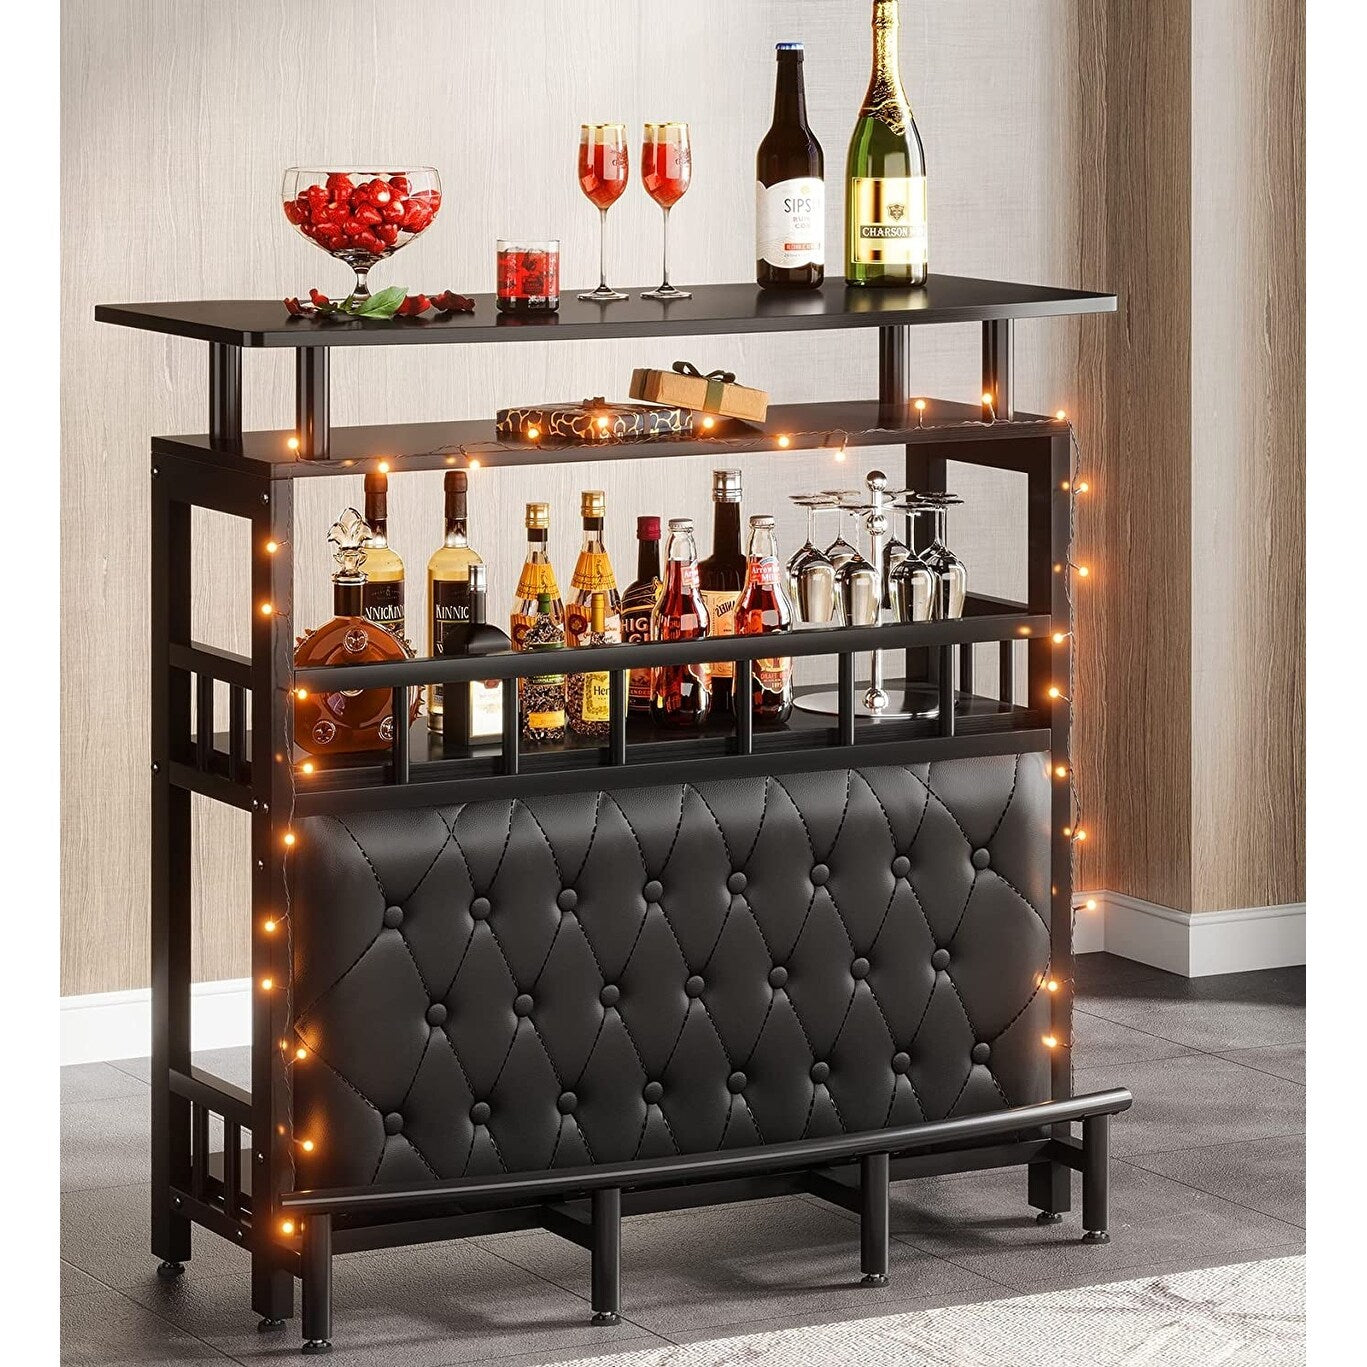 Bar Unit for Liquor, Home Enetertainement Bar with Storage